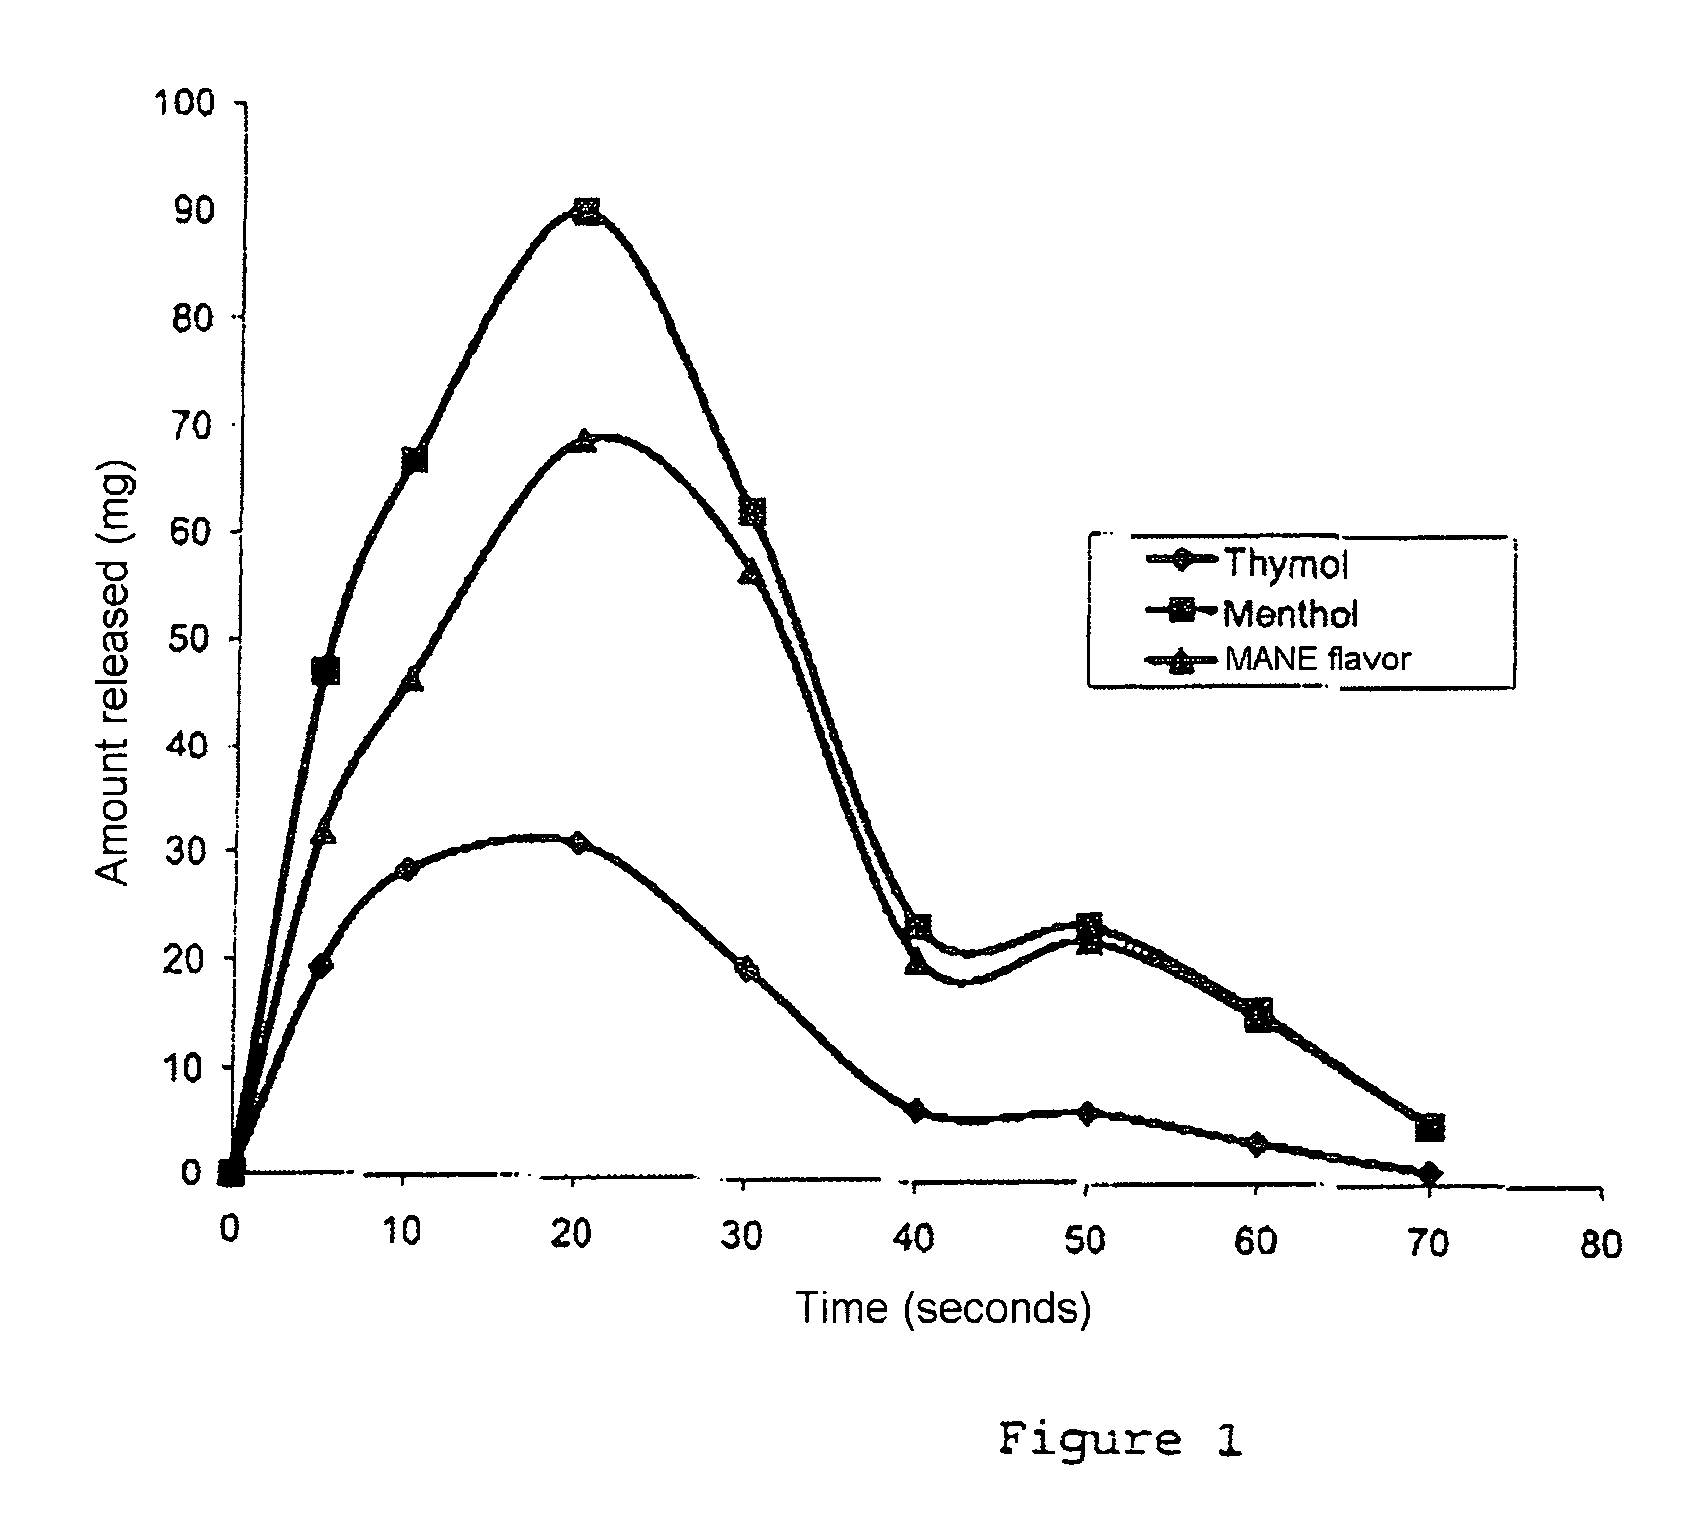 Capsule with fast content solubilization and release